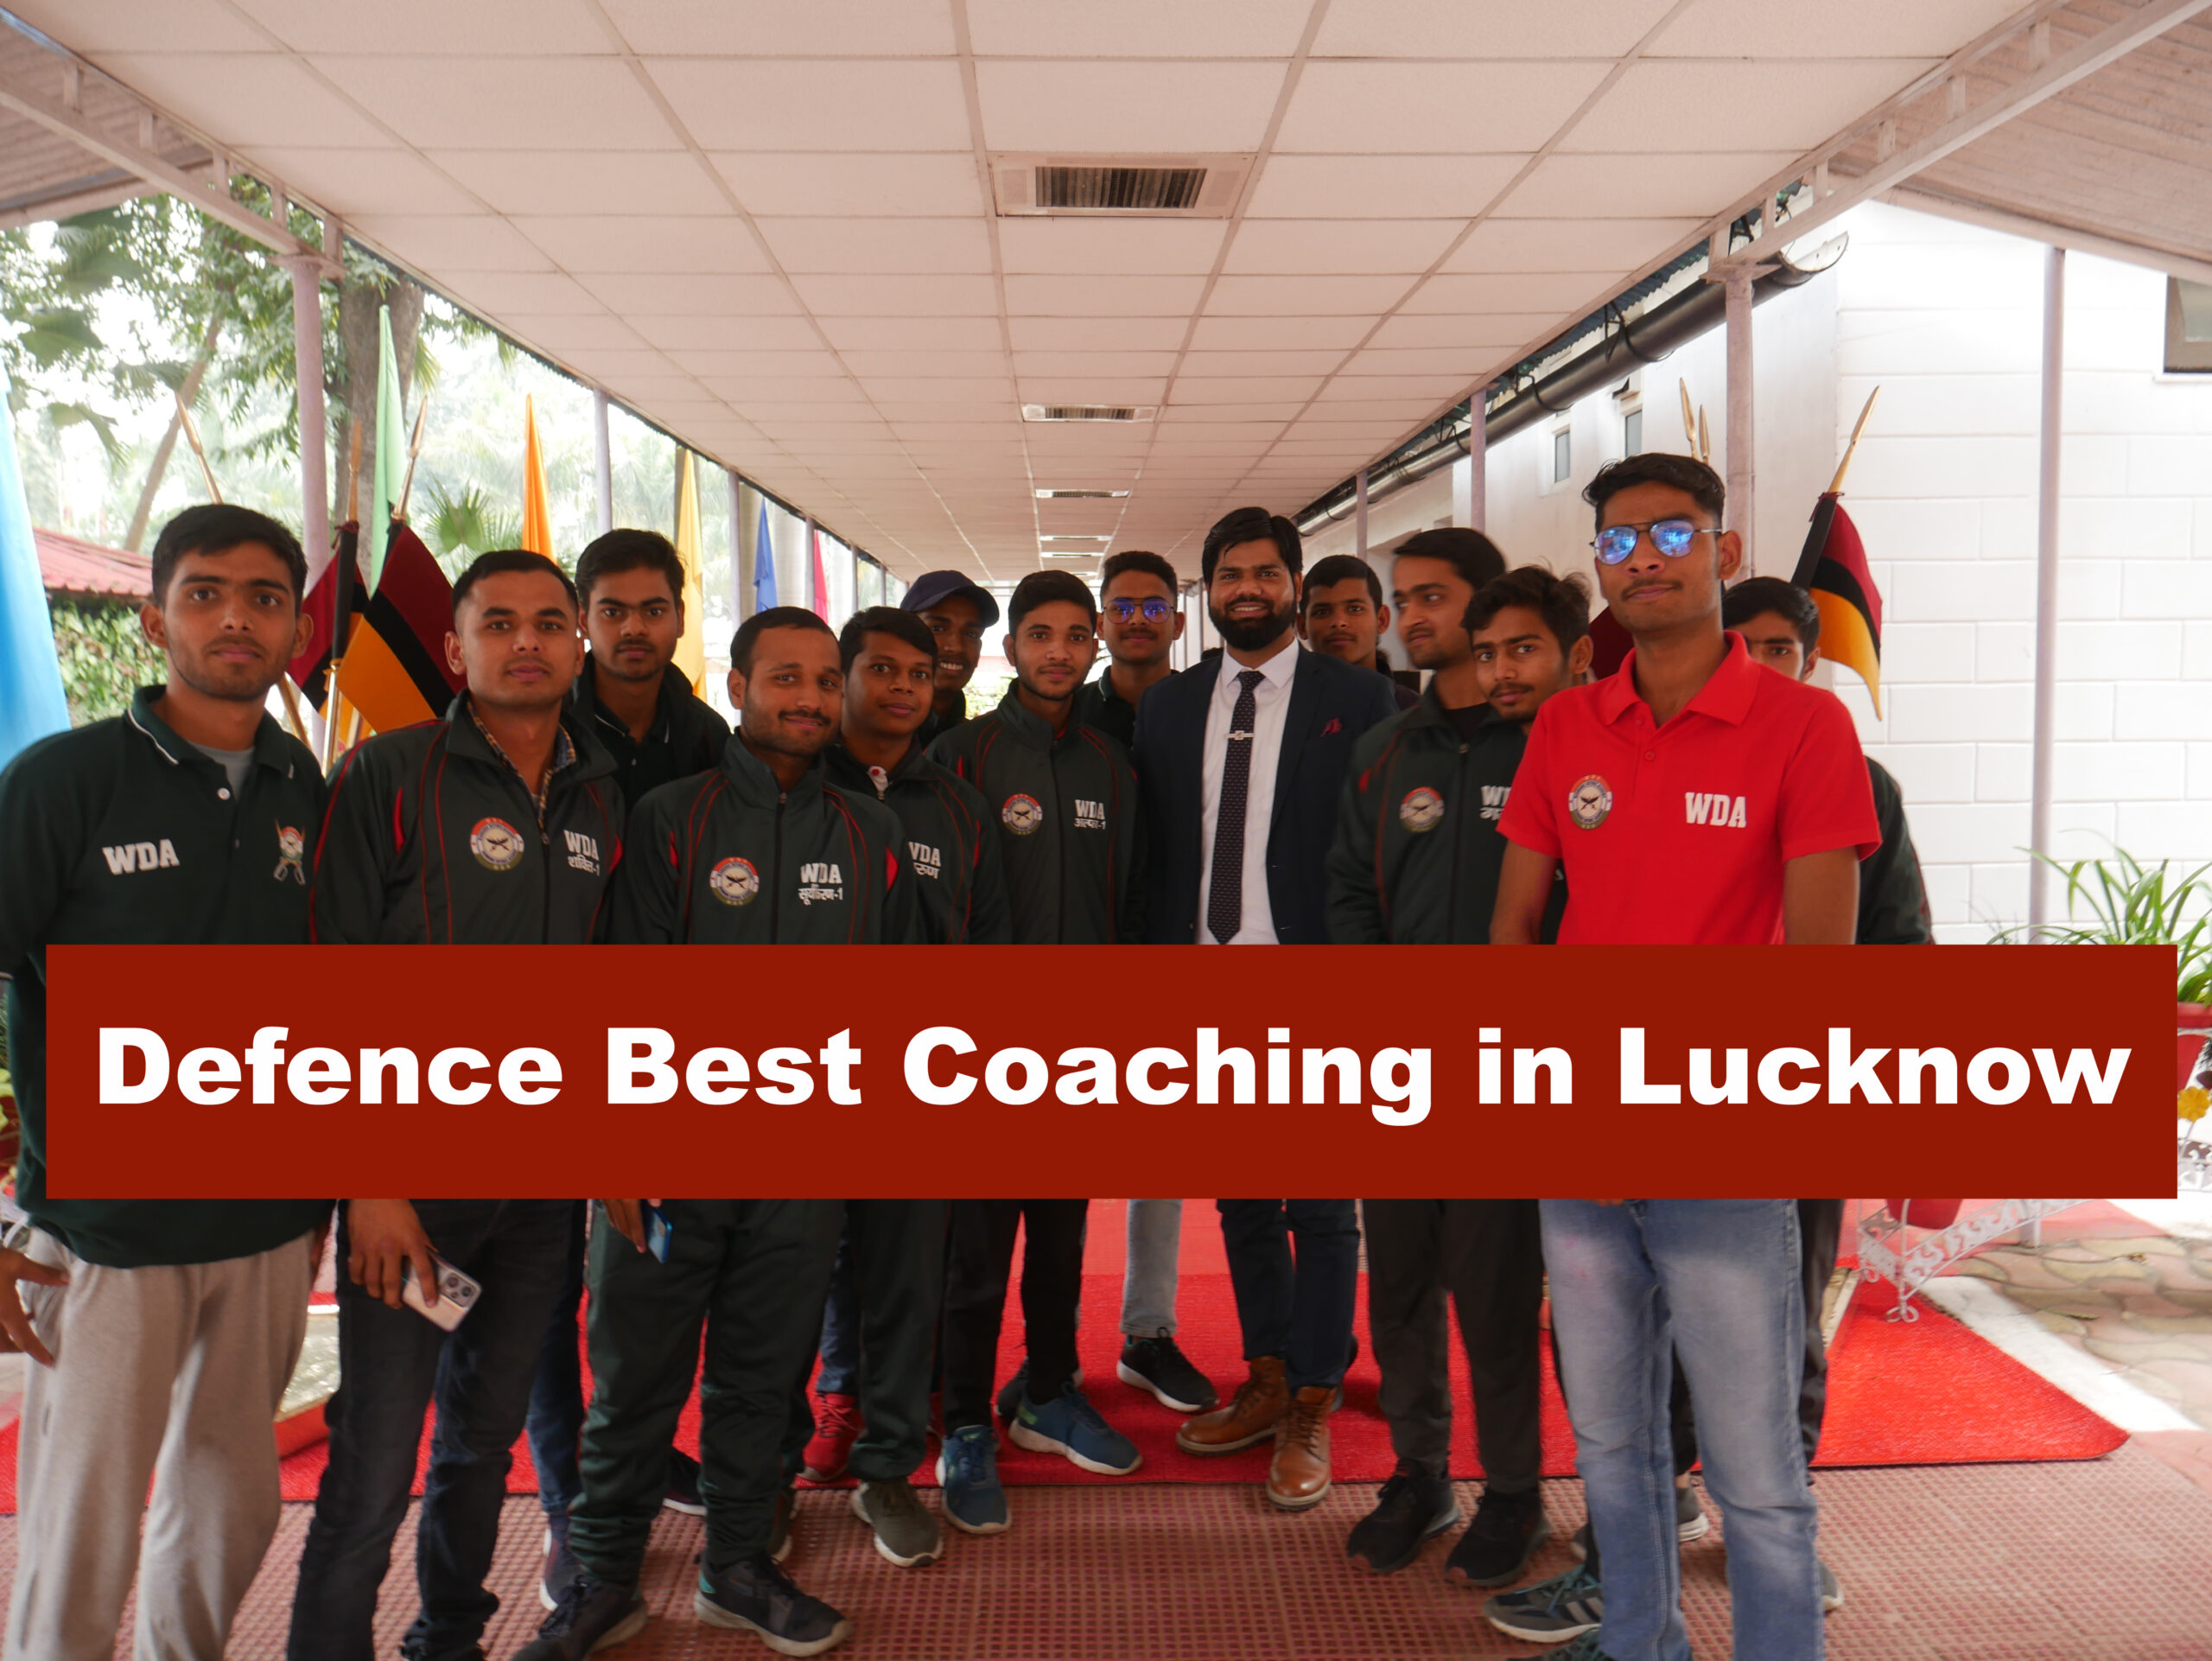 Defence Best Coaching in Lucknow